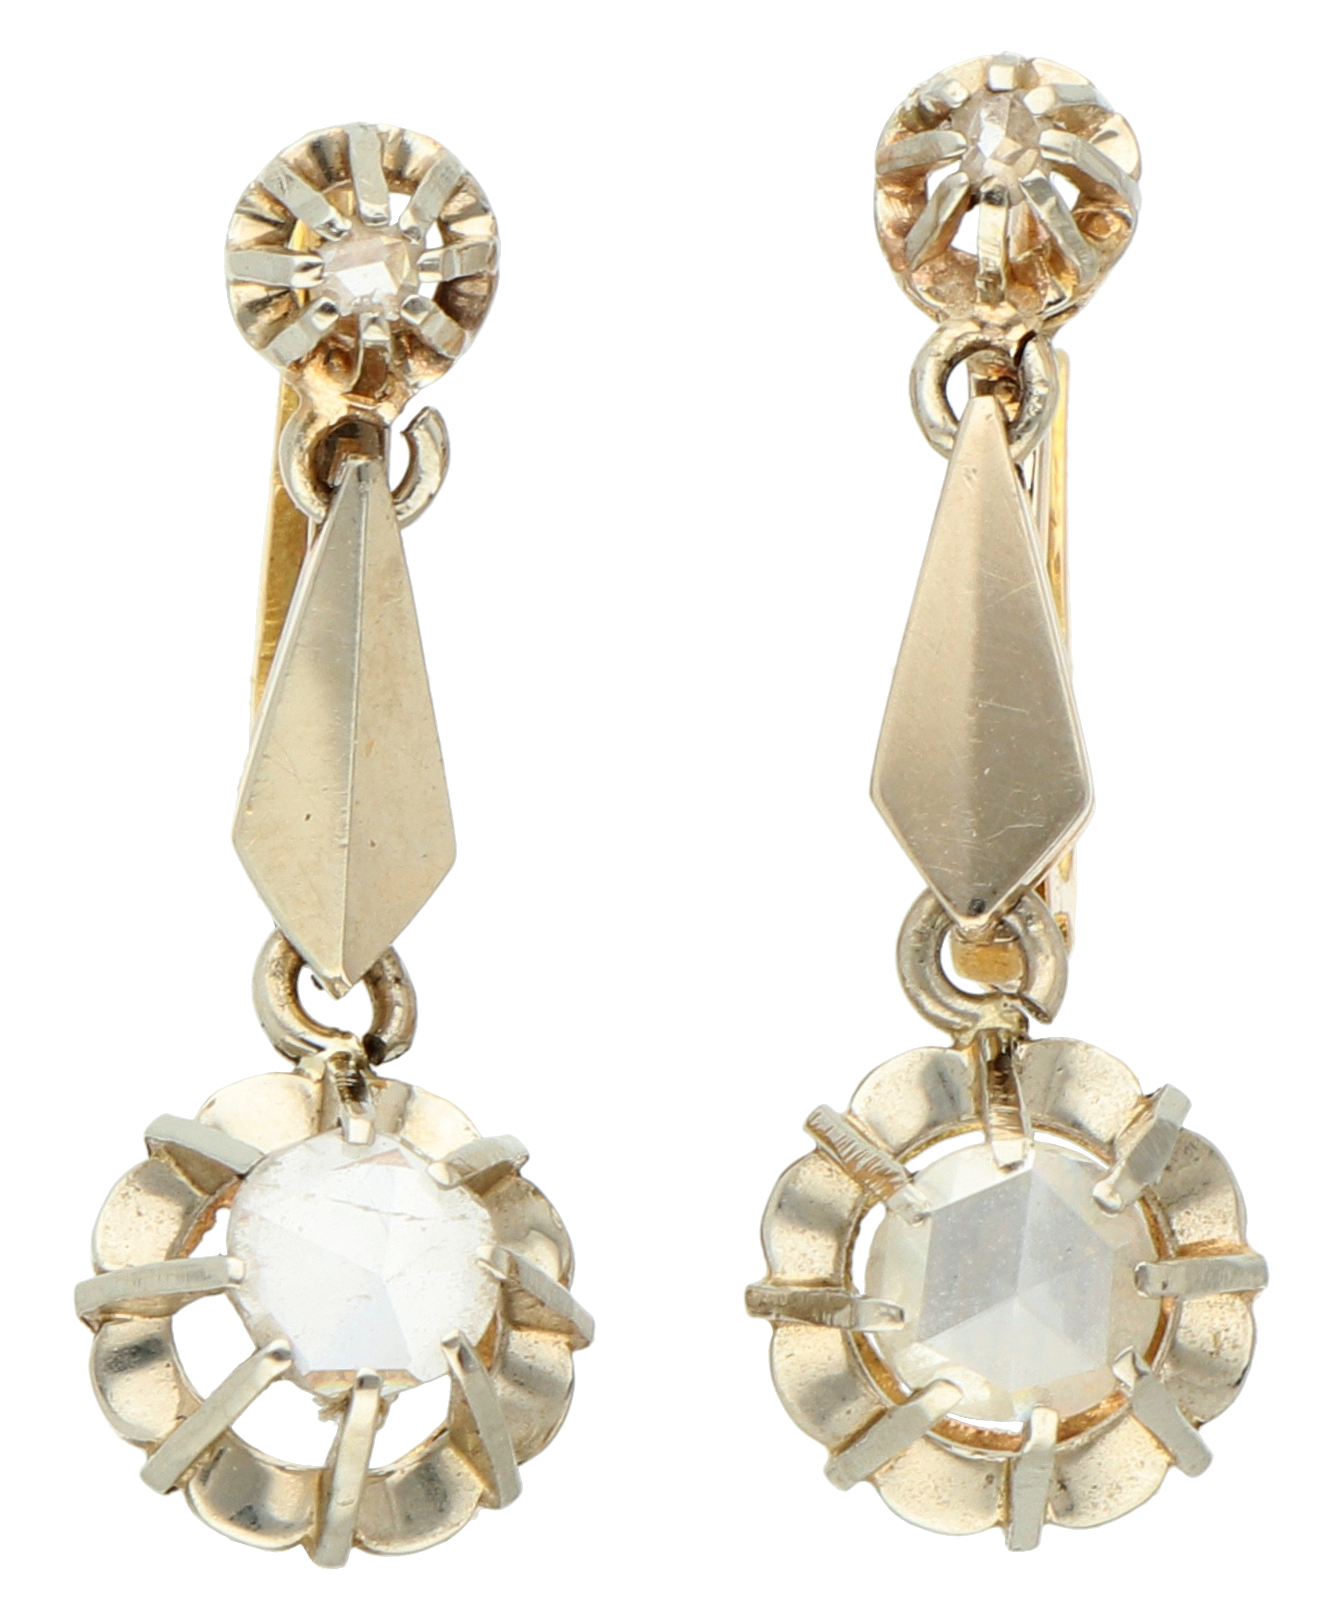 No Reserve - 18K Bicolor gold antique dormeuse earrings set with rose cut diamonds in antique prong 